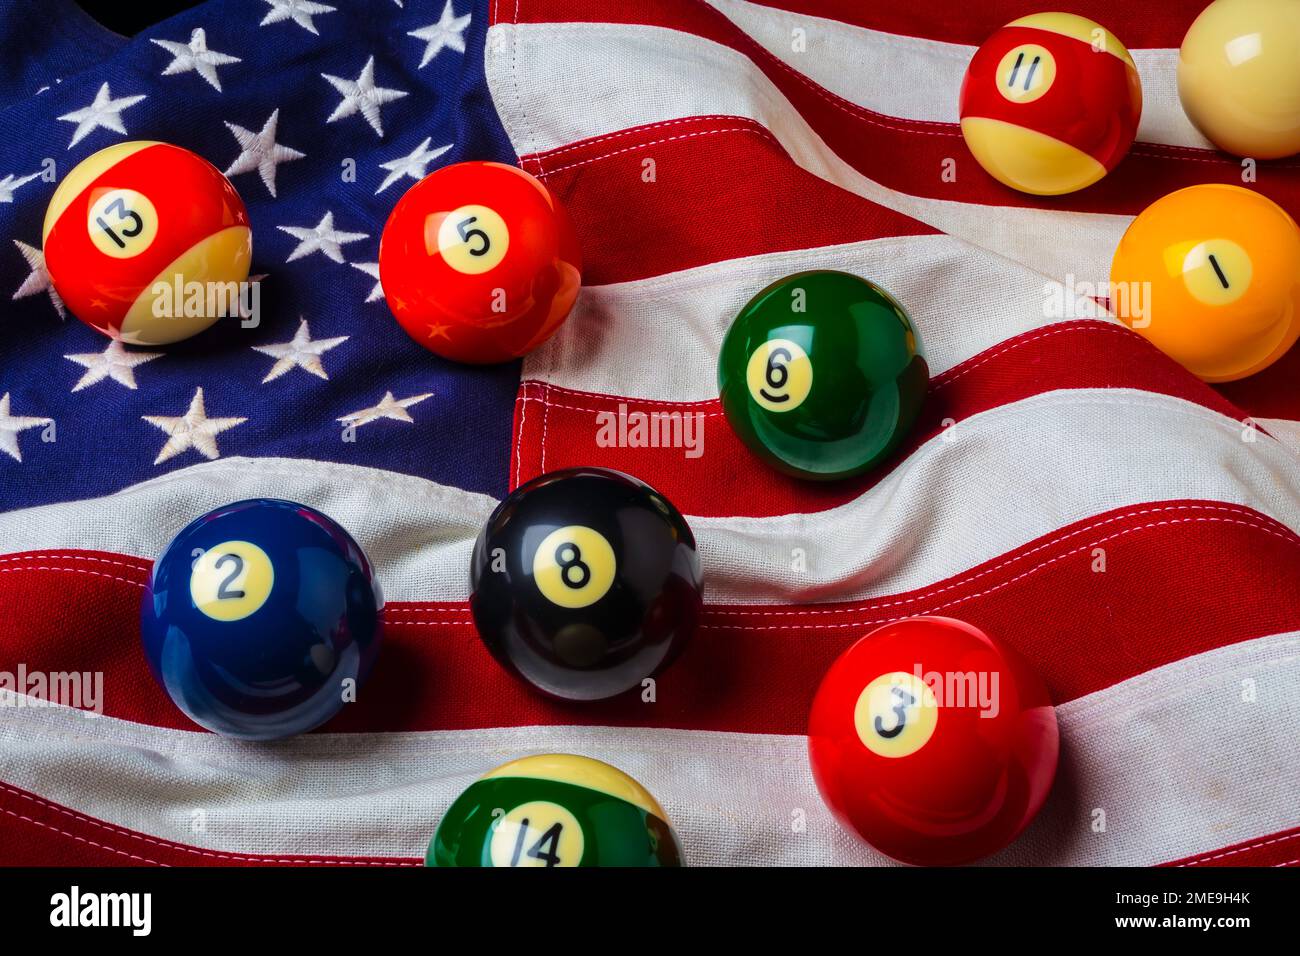 American Flag With Game Pool Balls Stock Photo